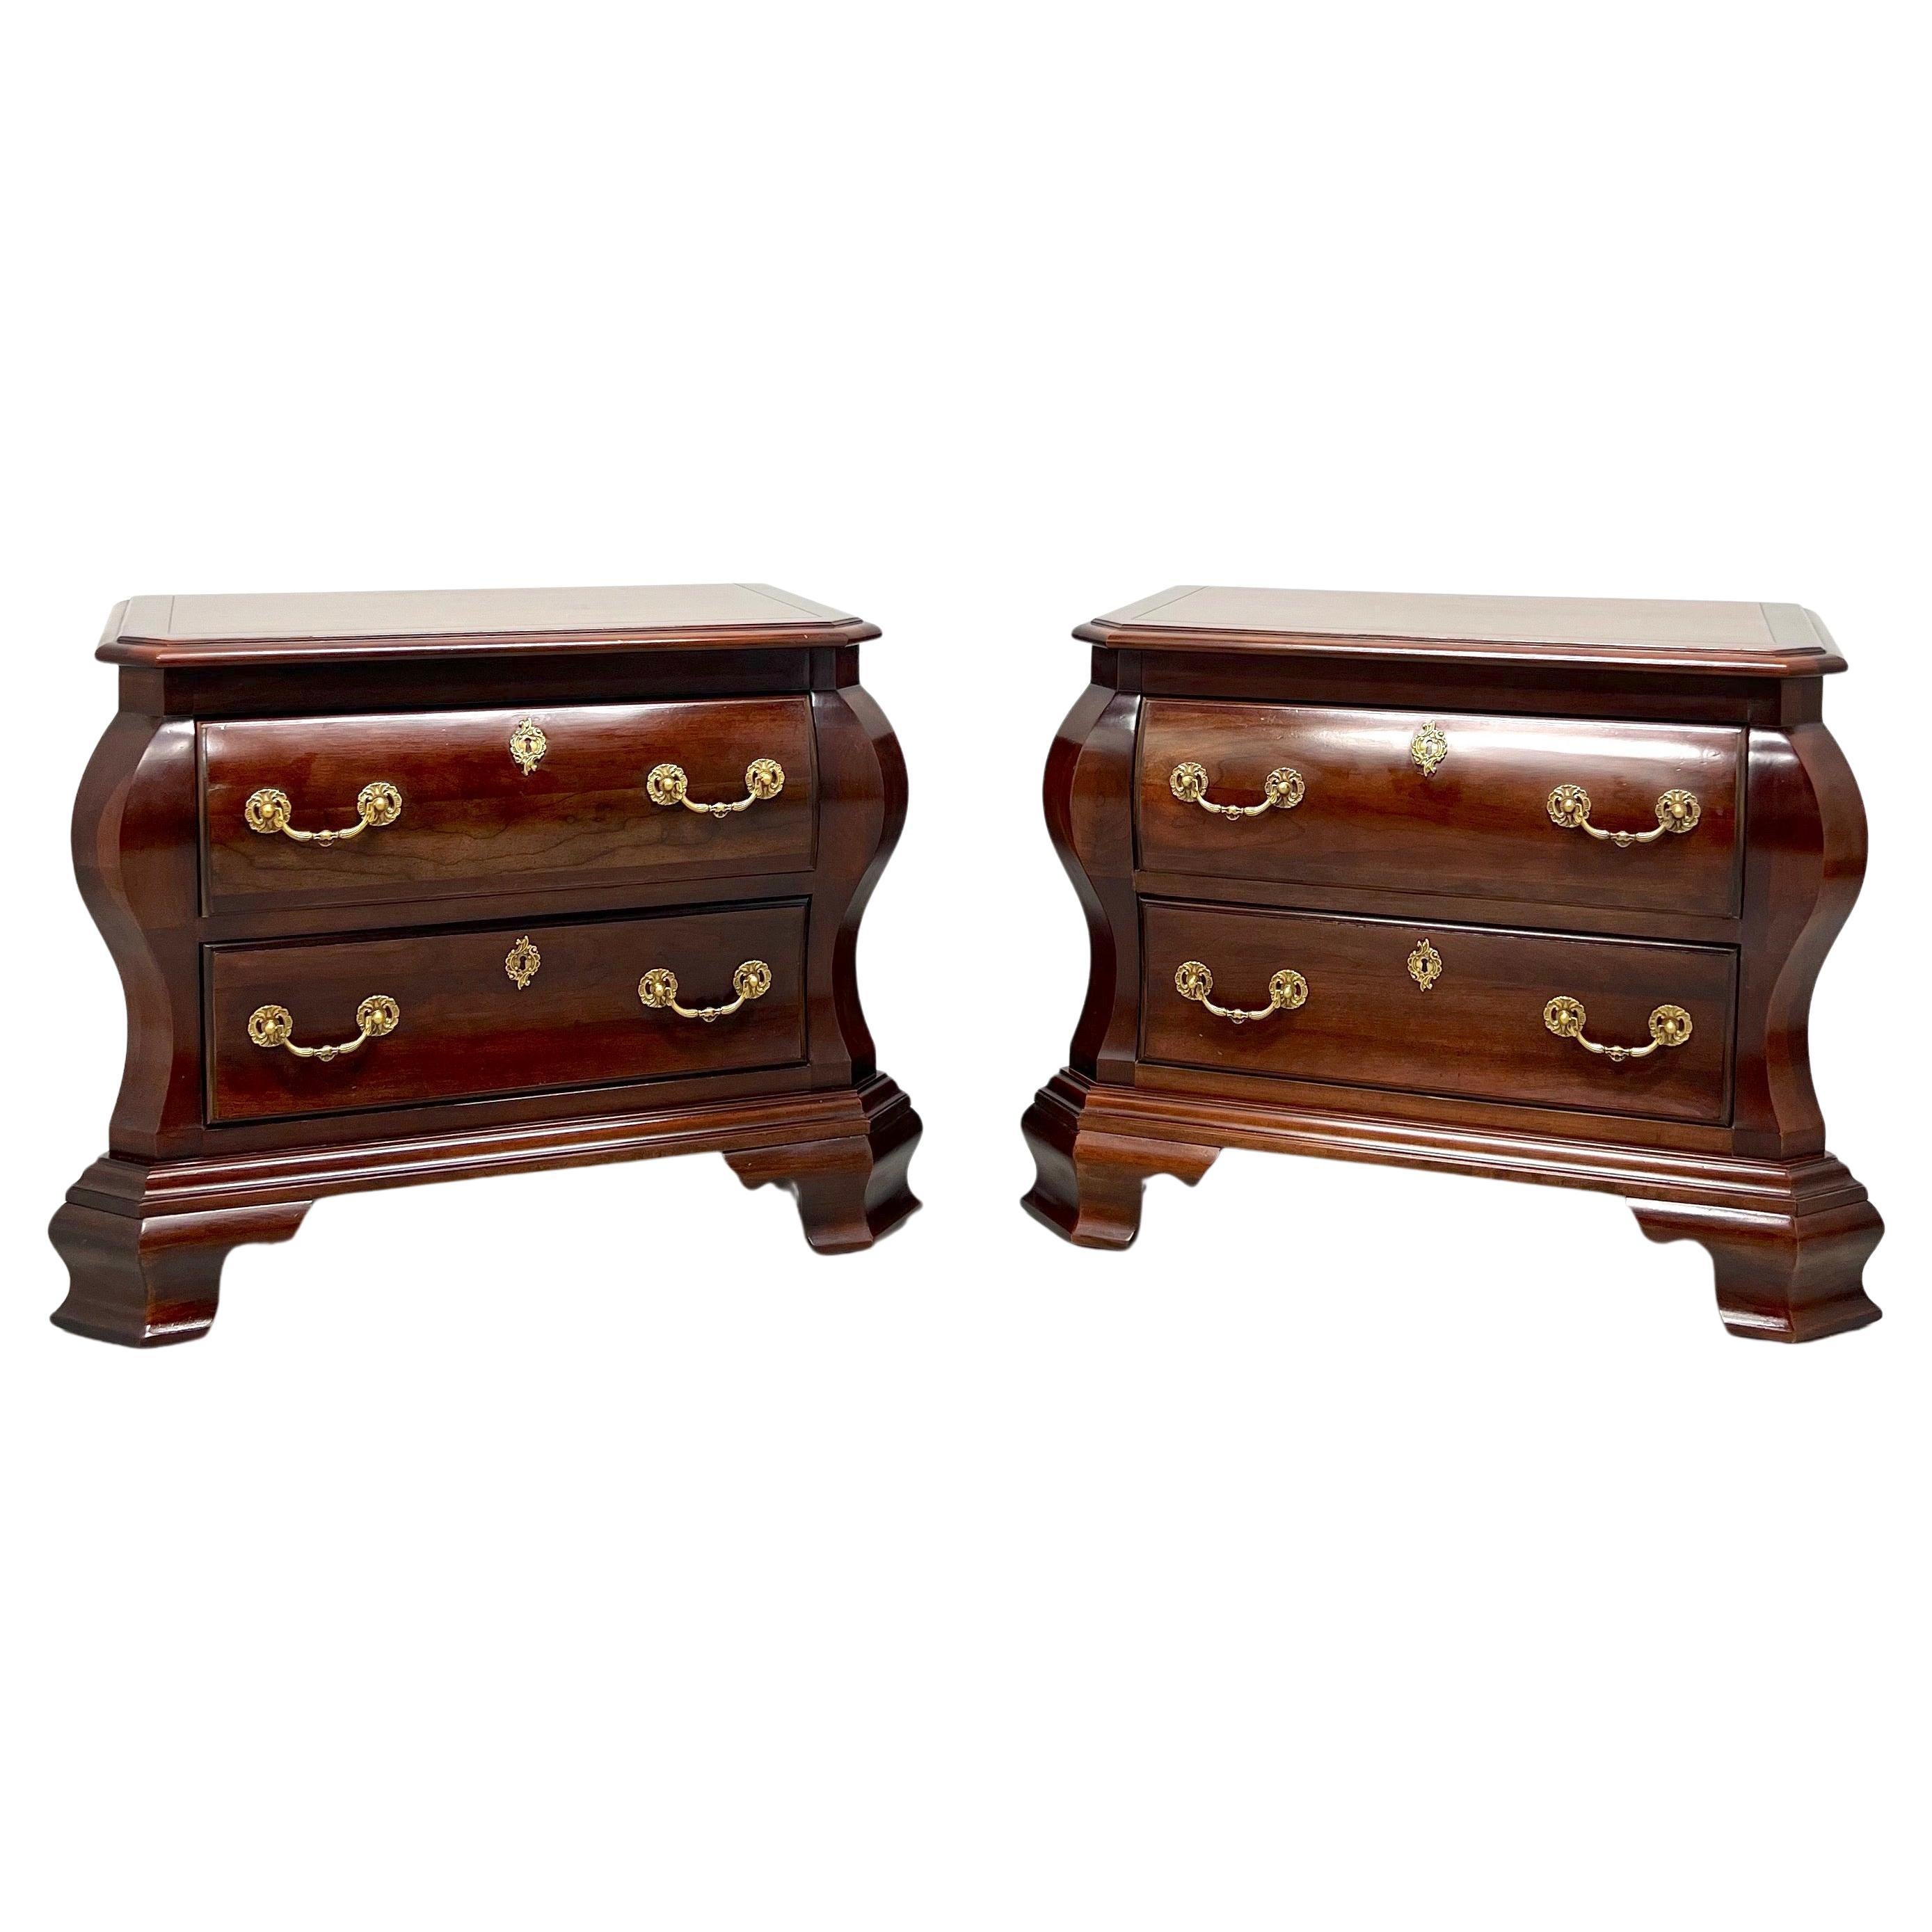 CENTURY Cardella Collection Cherry Italian Bombe Two-Drawer Nightstands - Pair